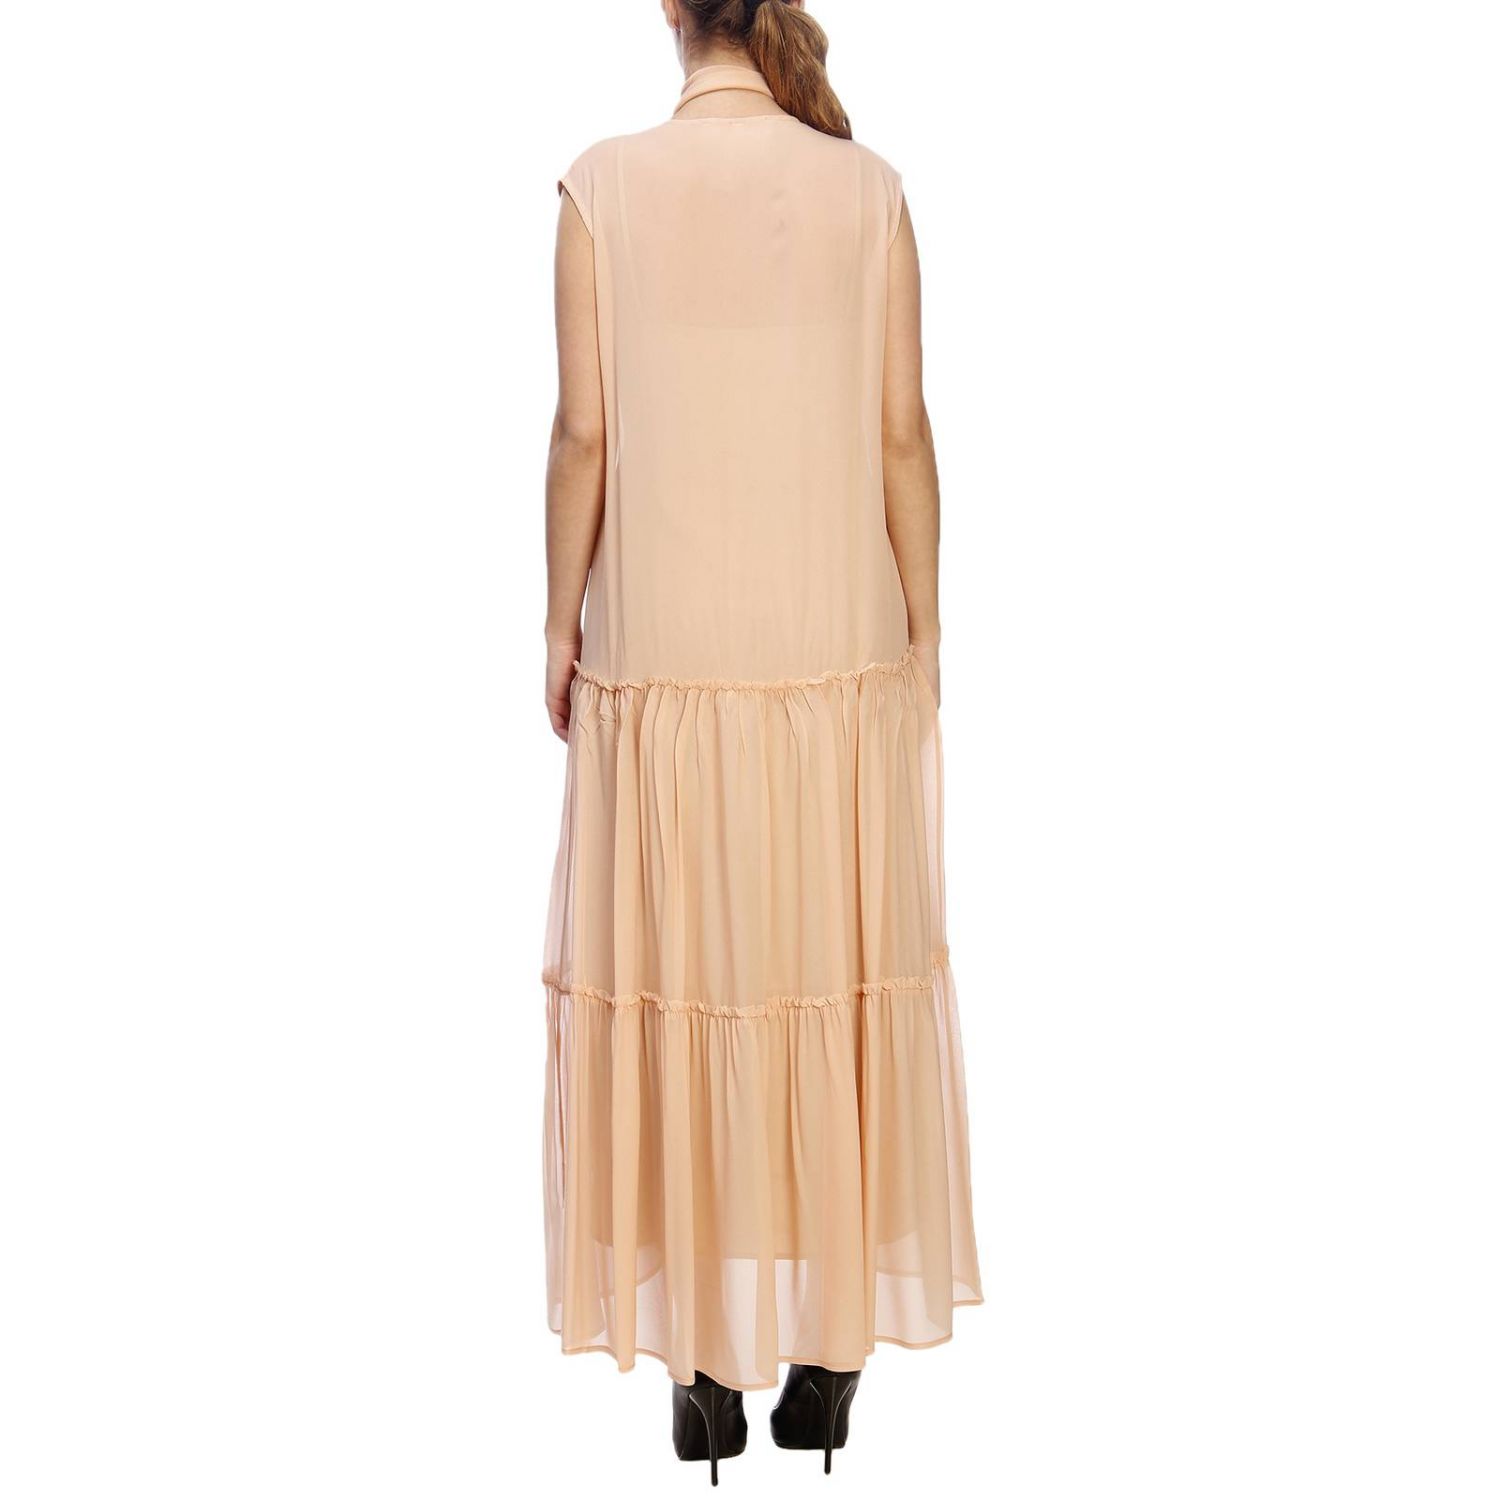 8Pm Outlet: dress for women - Pink | 8Pm dress D8PM91A131 online on ...